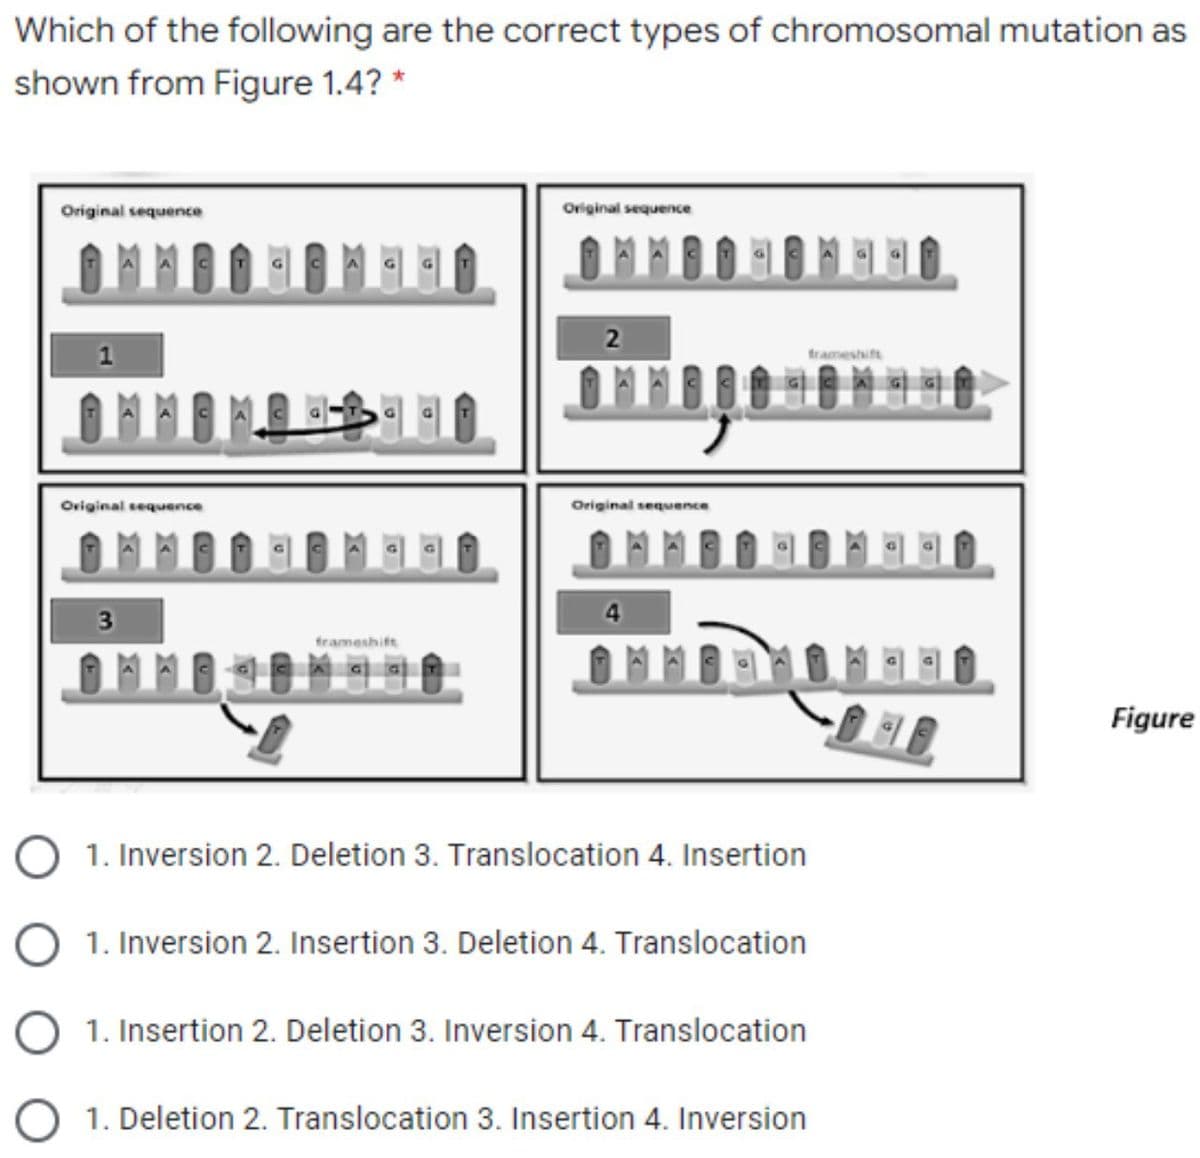 Which of the following are the correct types of chromosomal mutation as
shown from Figure 1.4? *
Original sequence
Original sequence
2
trameshift
Original sequence
Original sequence
3
frameshift
Figure
1. Inversion 2. Deletion 3. Translocation 4. Insertion
1. Inversion 2. Insertion 3. Deletion 4. Translocation
O 1. Insertion 2. Deletion 3. Inversion 4. Translocation
1. Deletion 2. Translocation 3. Insertion 4. Inversion
